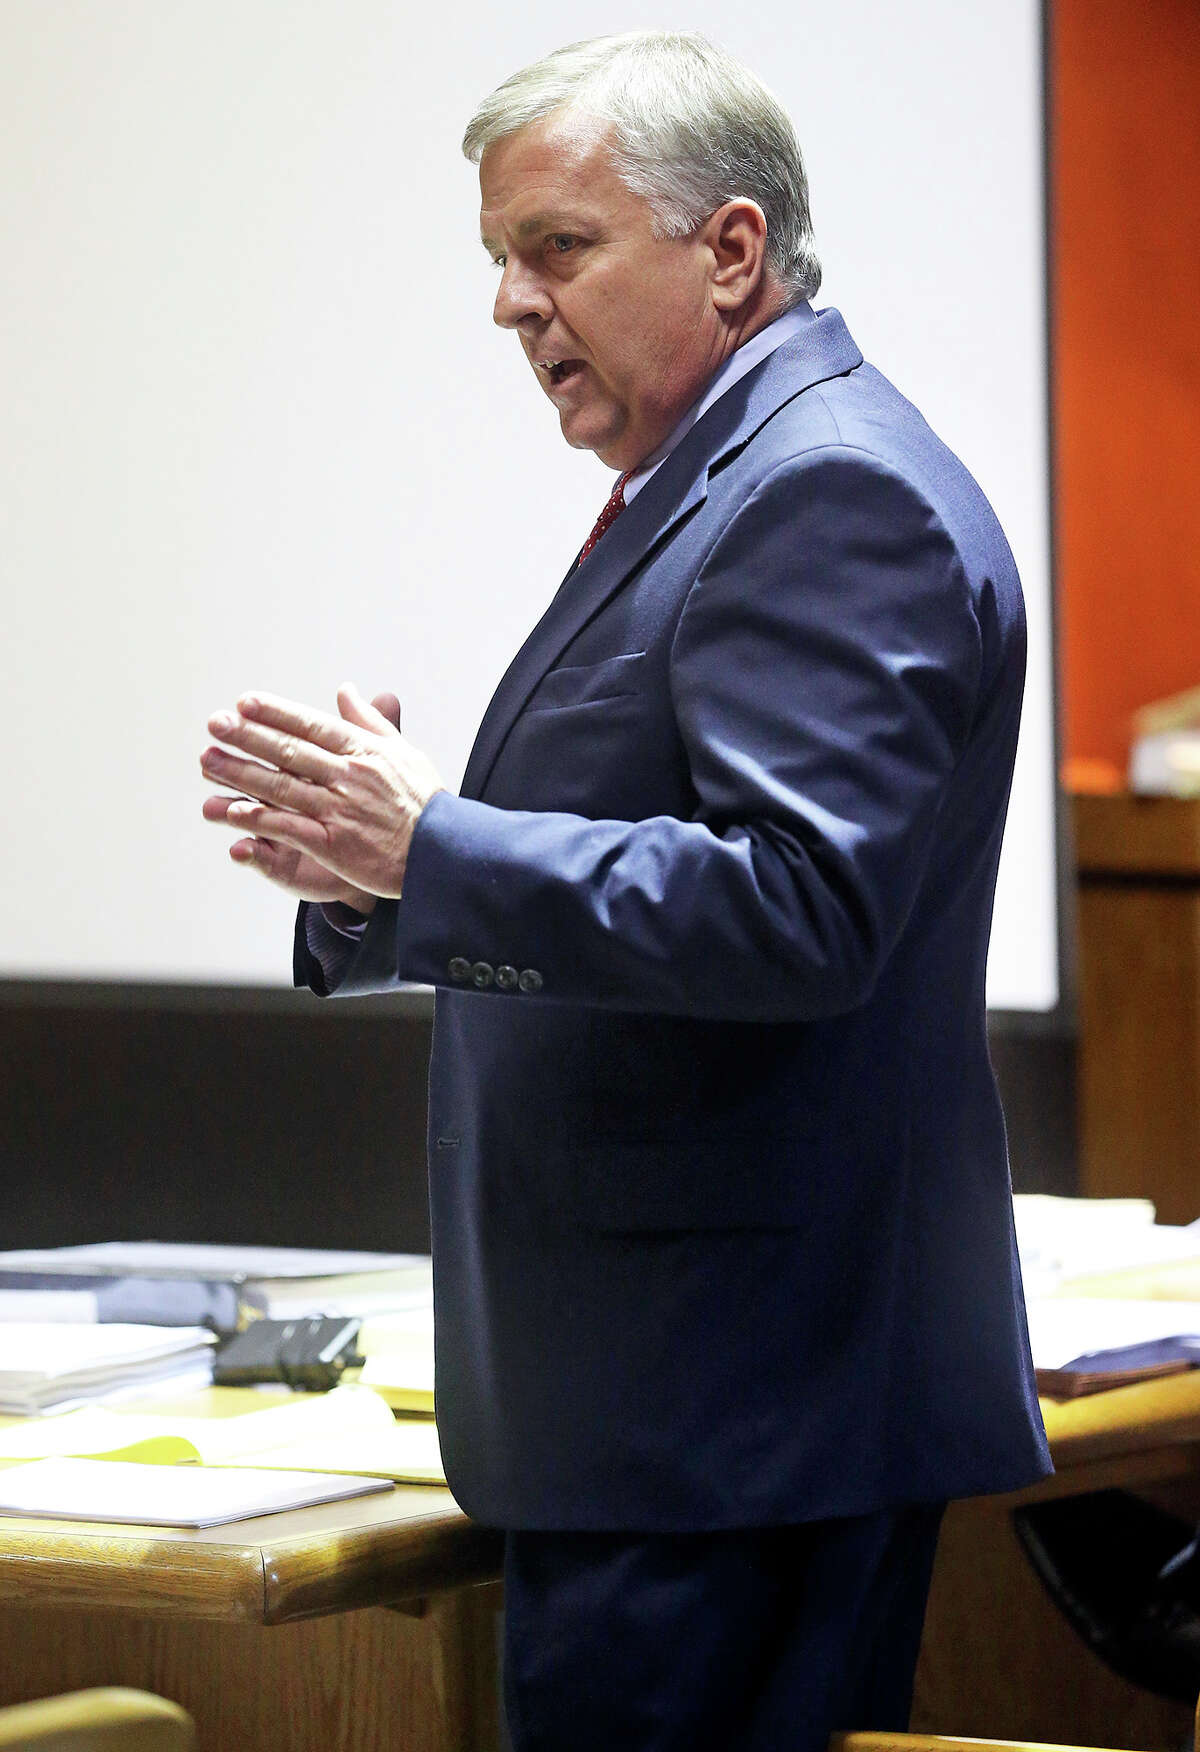 Plaintiff attorney Ray B. Jeffrey presents his case as lawyers in the Monique Rathbun versus the Church of Scientology case argue points in the courtroom of Dib Waldrip on January 22, 2014.